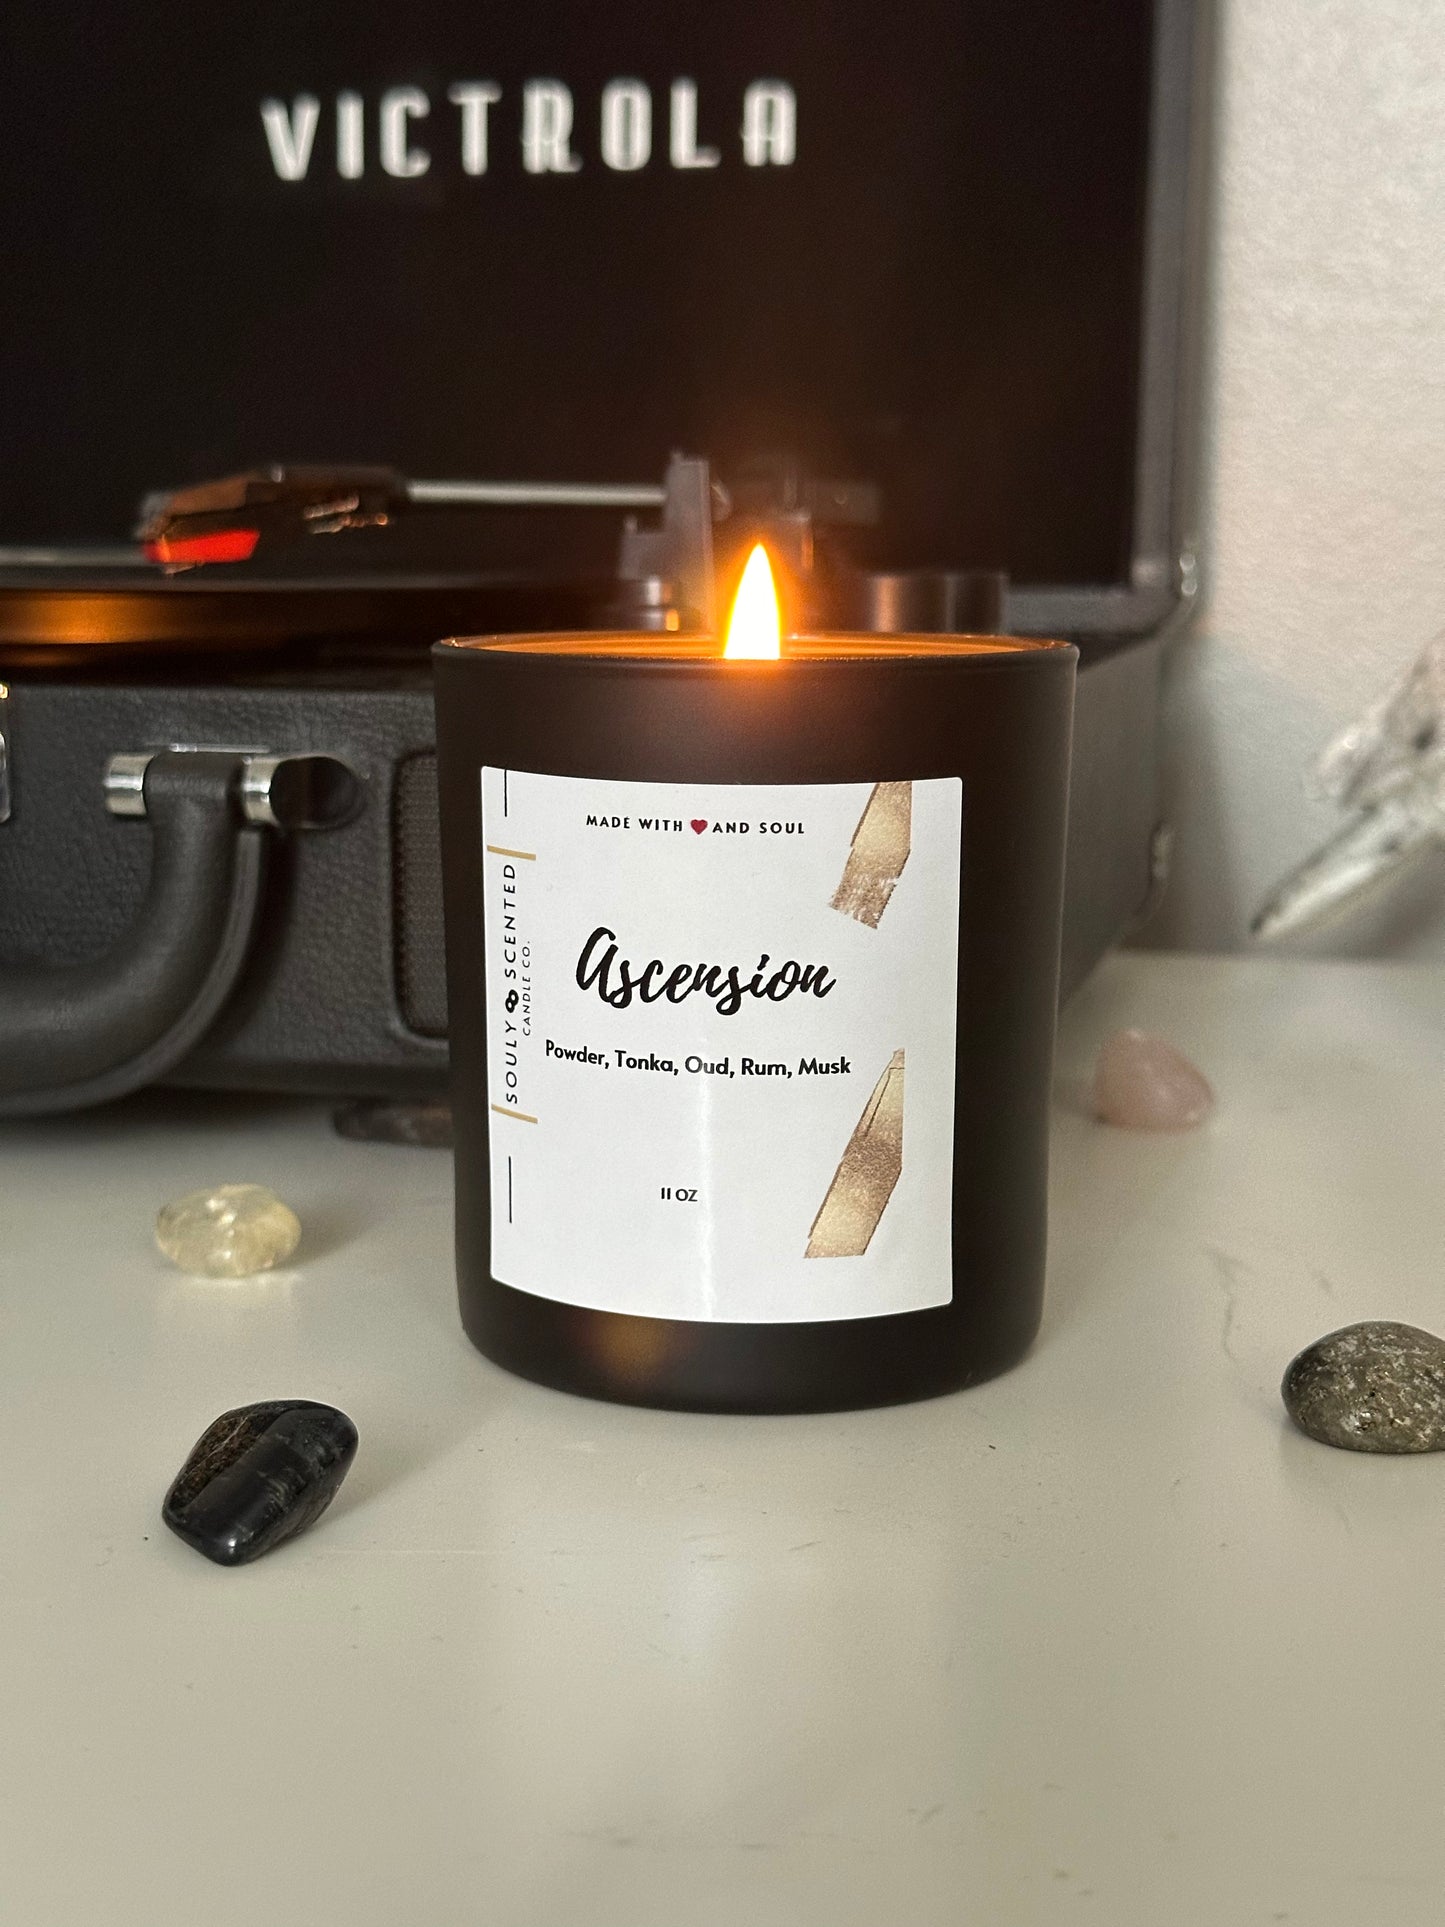 Ascension Candle